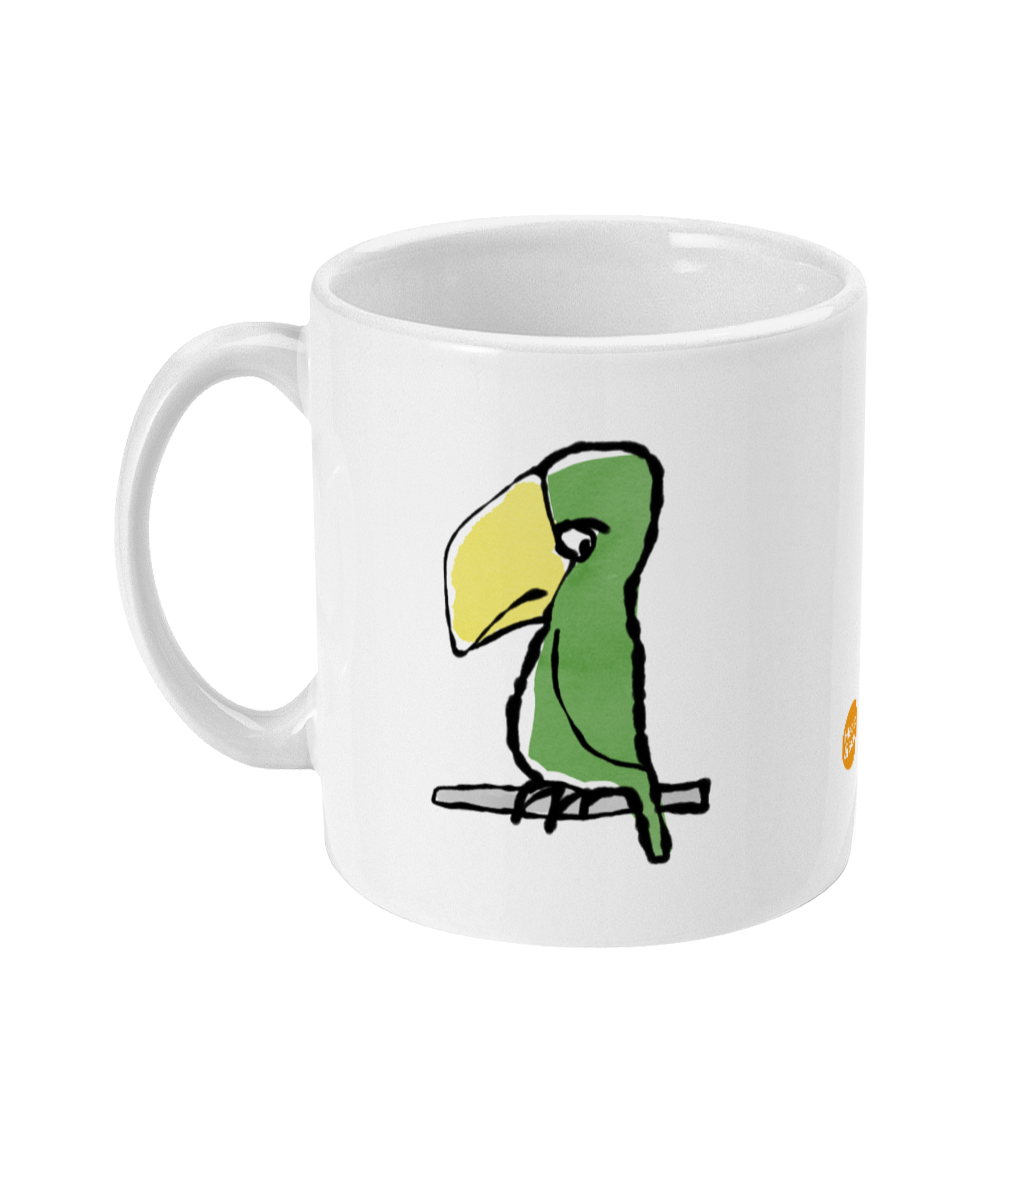 Peter Parrot Mug - Funny grumpy parrot illustrated coffee mug by Hector and Bone Left View